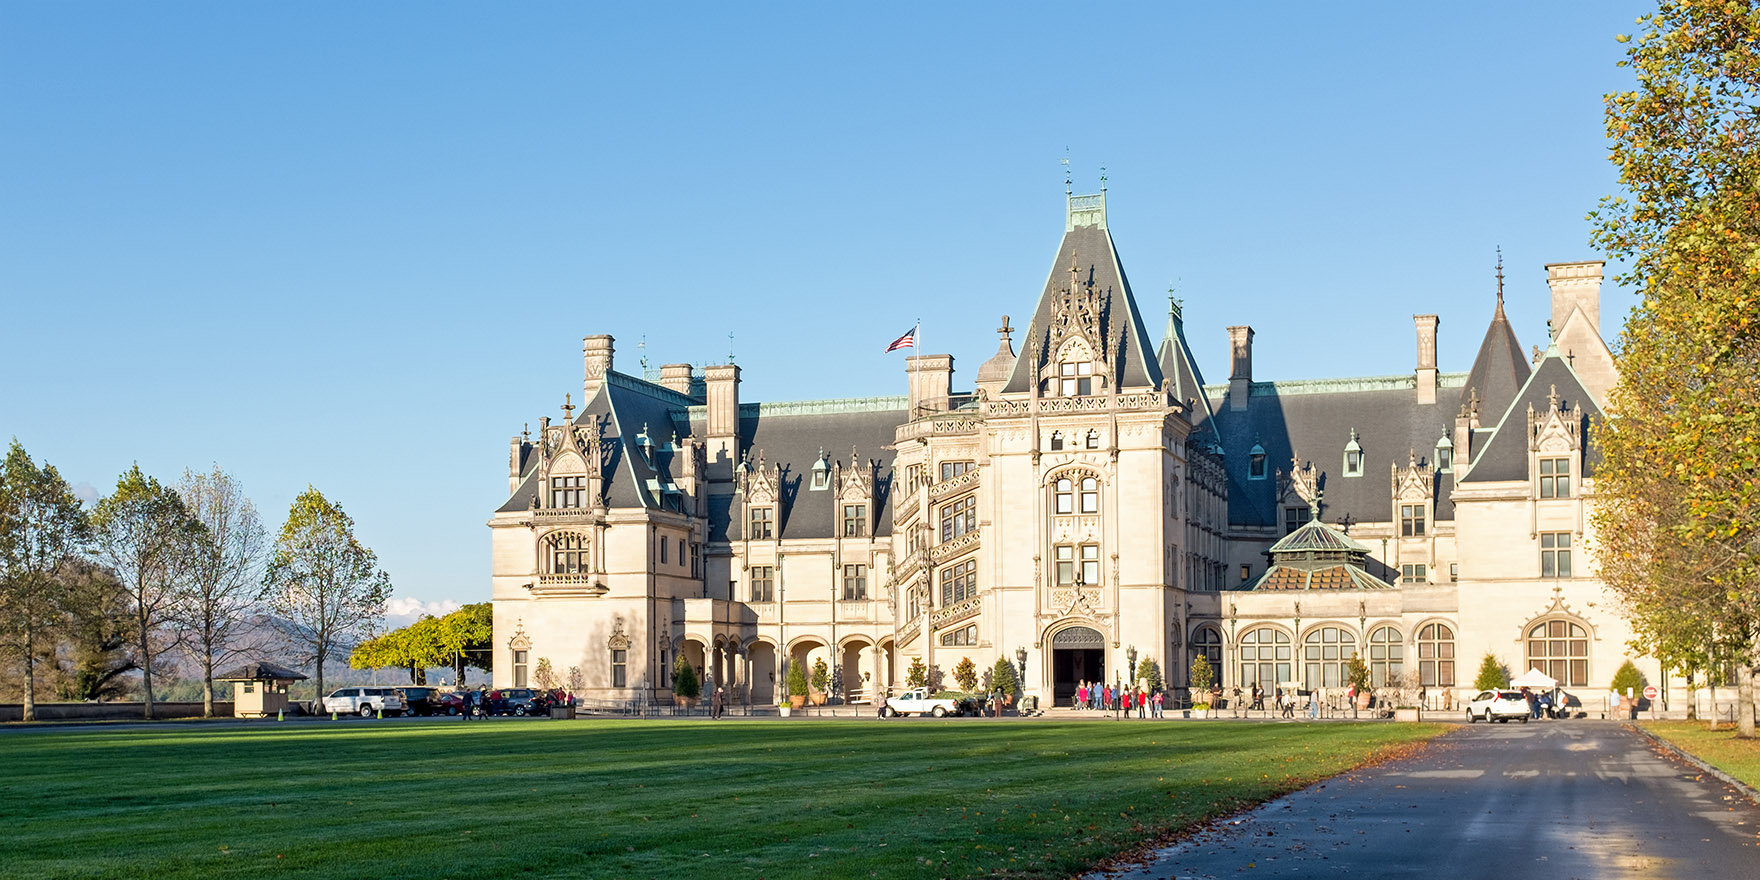 Biltmore House seen from the access road